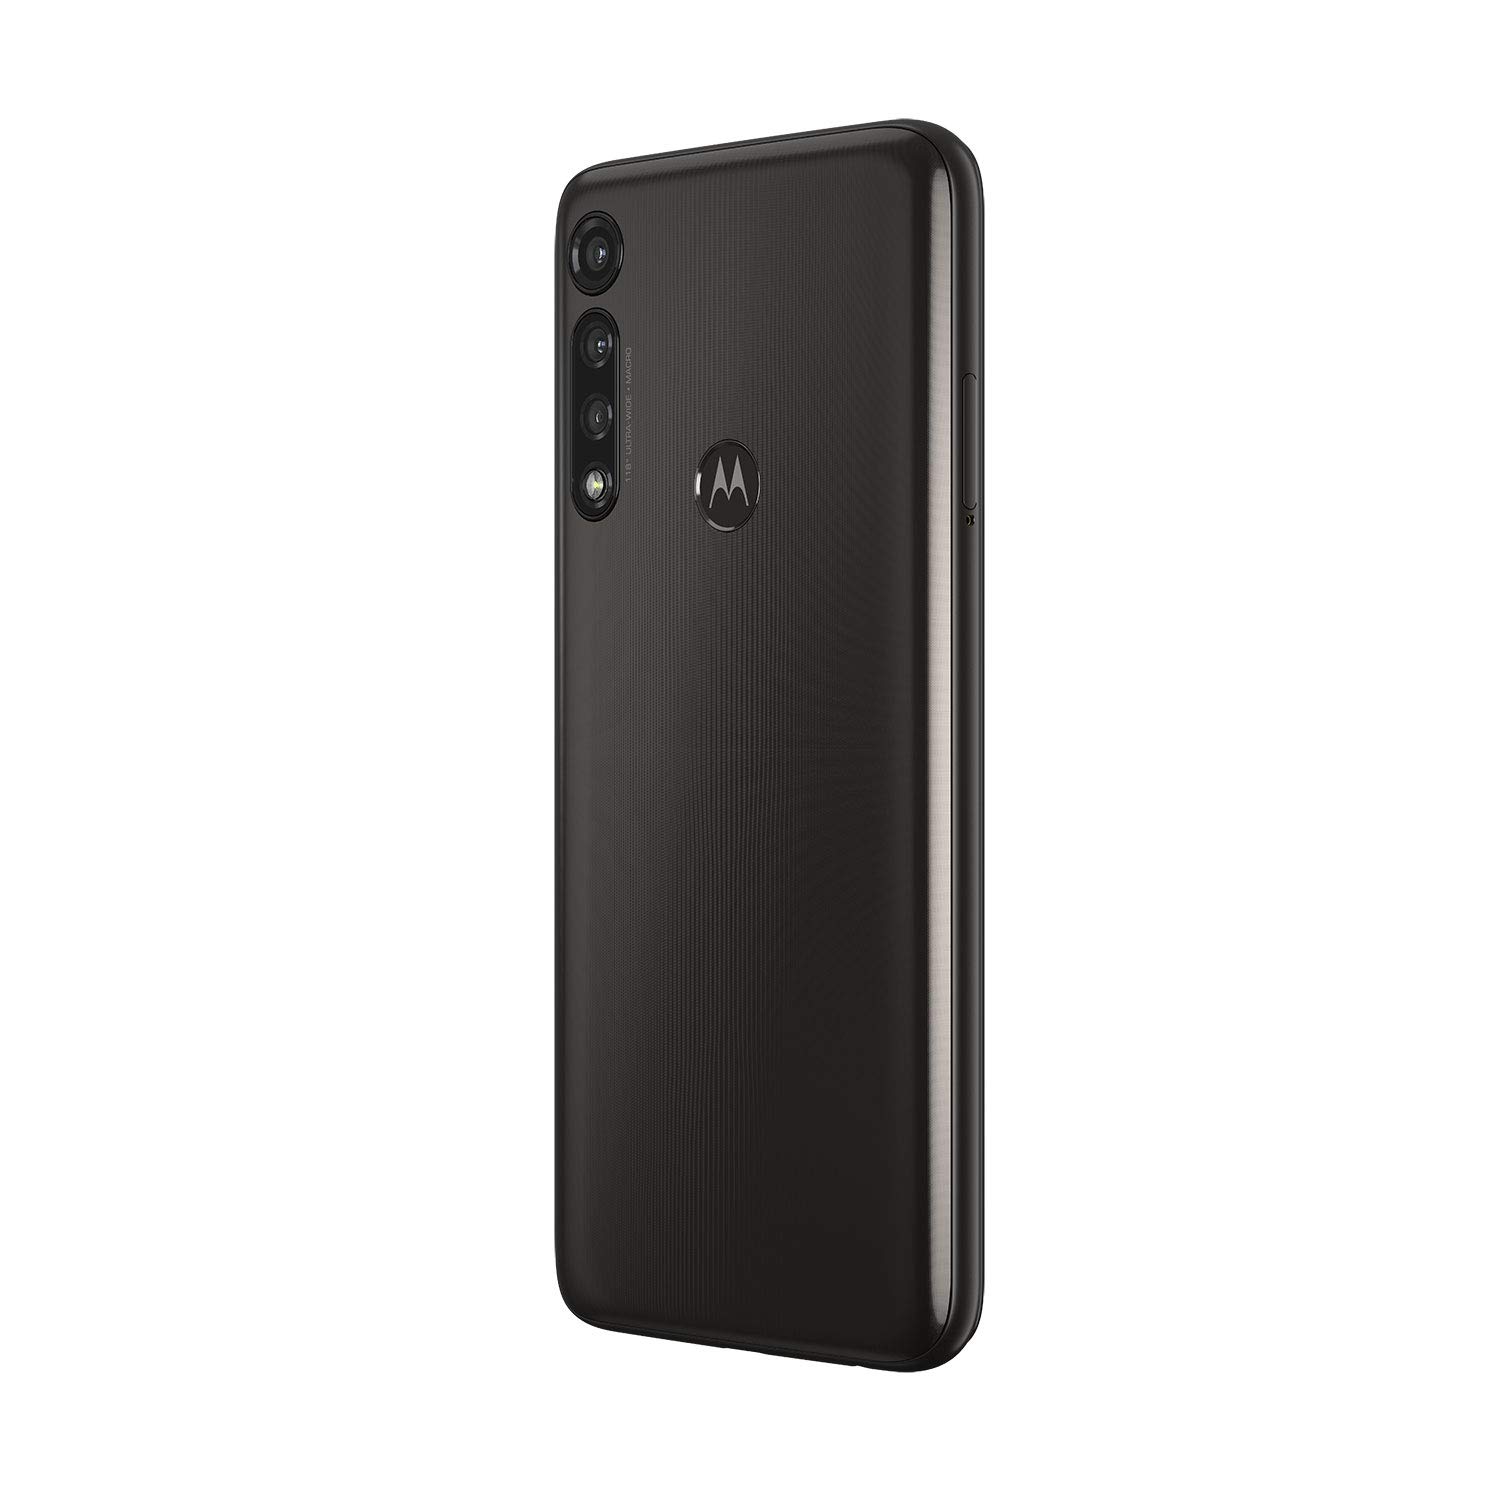 Moto G8 Power | Unlocked | International GSM Only | 4/64GB | 16MP Camera | 2020 | Black | NOT compatible with Sprint or Verizon